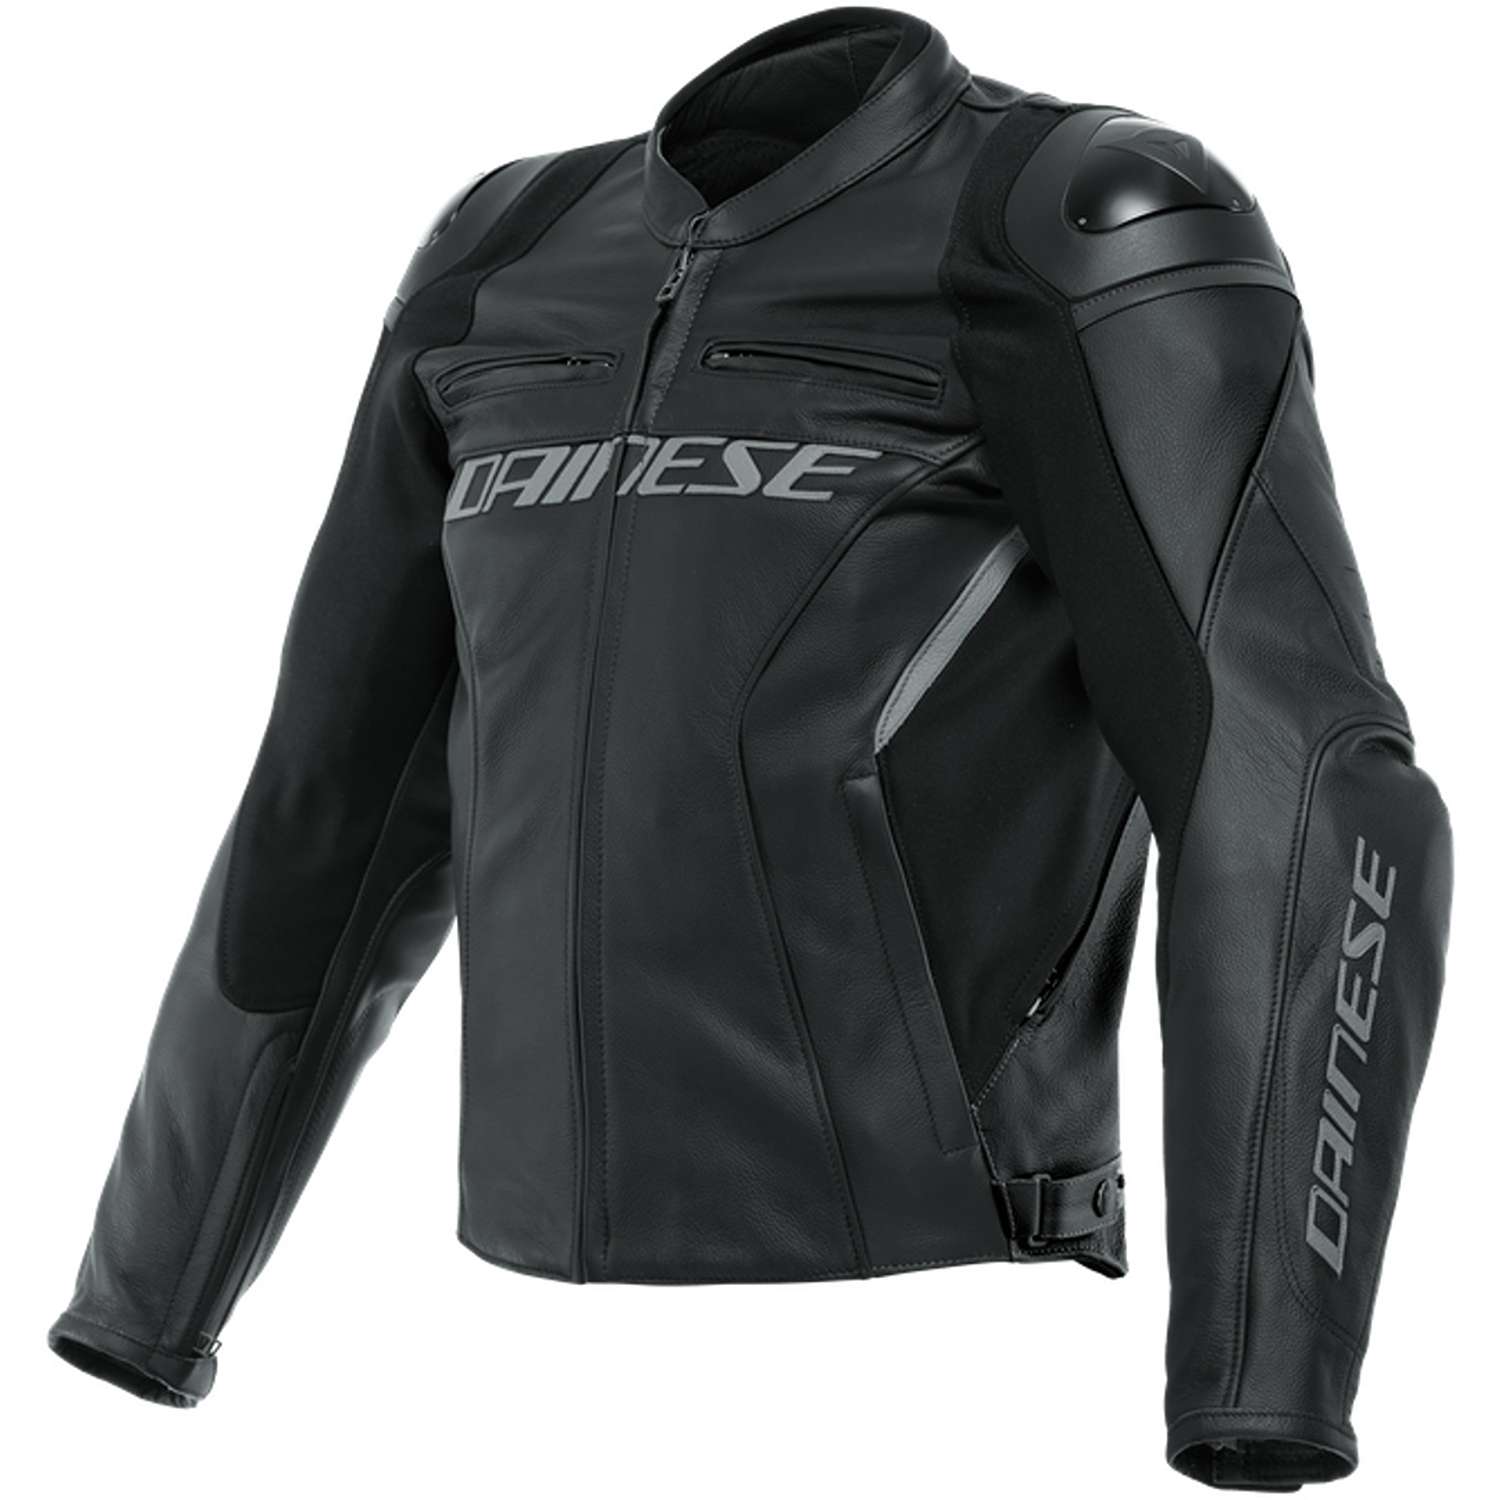 Image of Dainese Racing 4 Leather Jacket S/T Black Size 27 ID 8051019321107